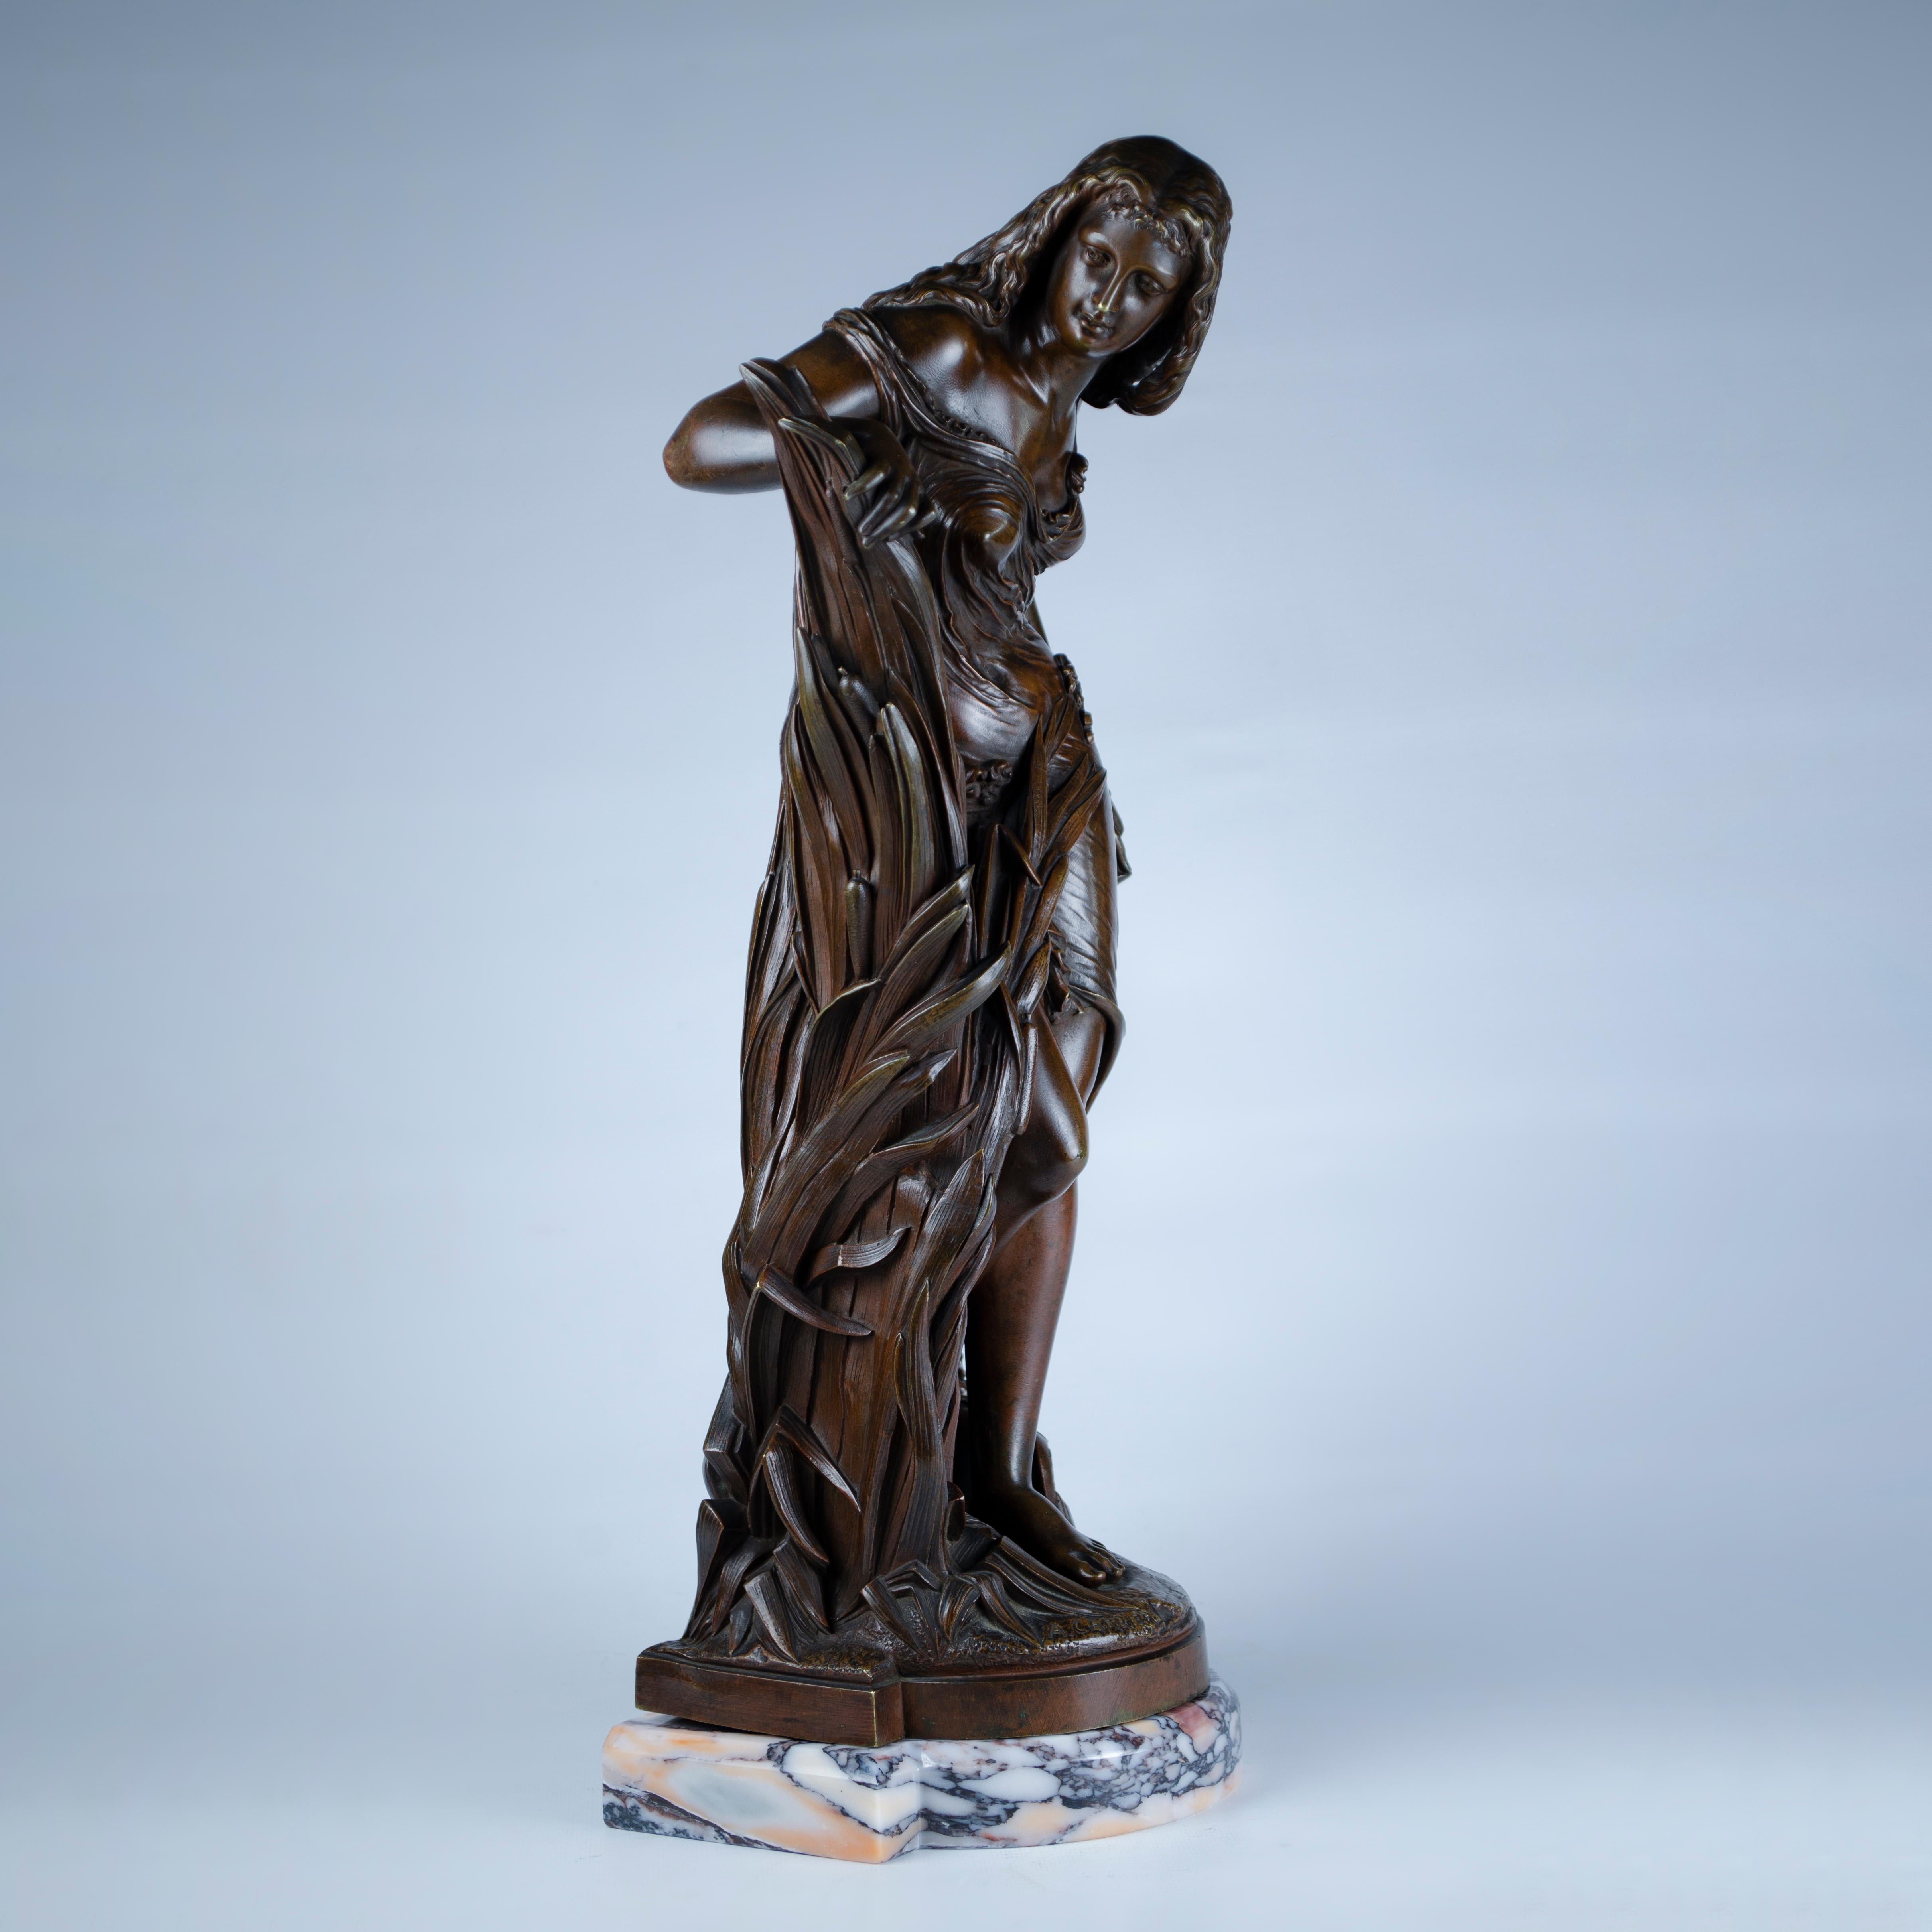 Very finely chiselled cast bronze sculpture depicting a beautiful nude nymph standing emerging from tall reeds at the edge of a stream. At her feet is a water jug, with a marble base. Made by Albert-Ernest Carrier-Belleuse, (1824-1887). Signed A.